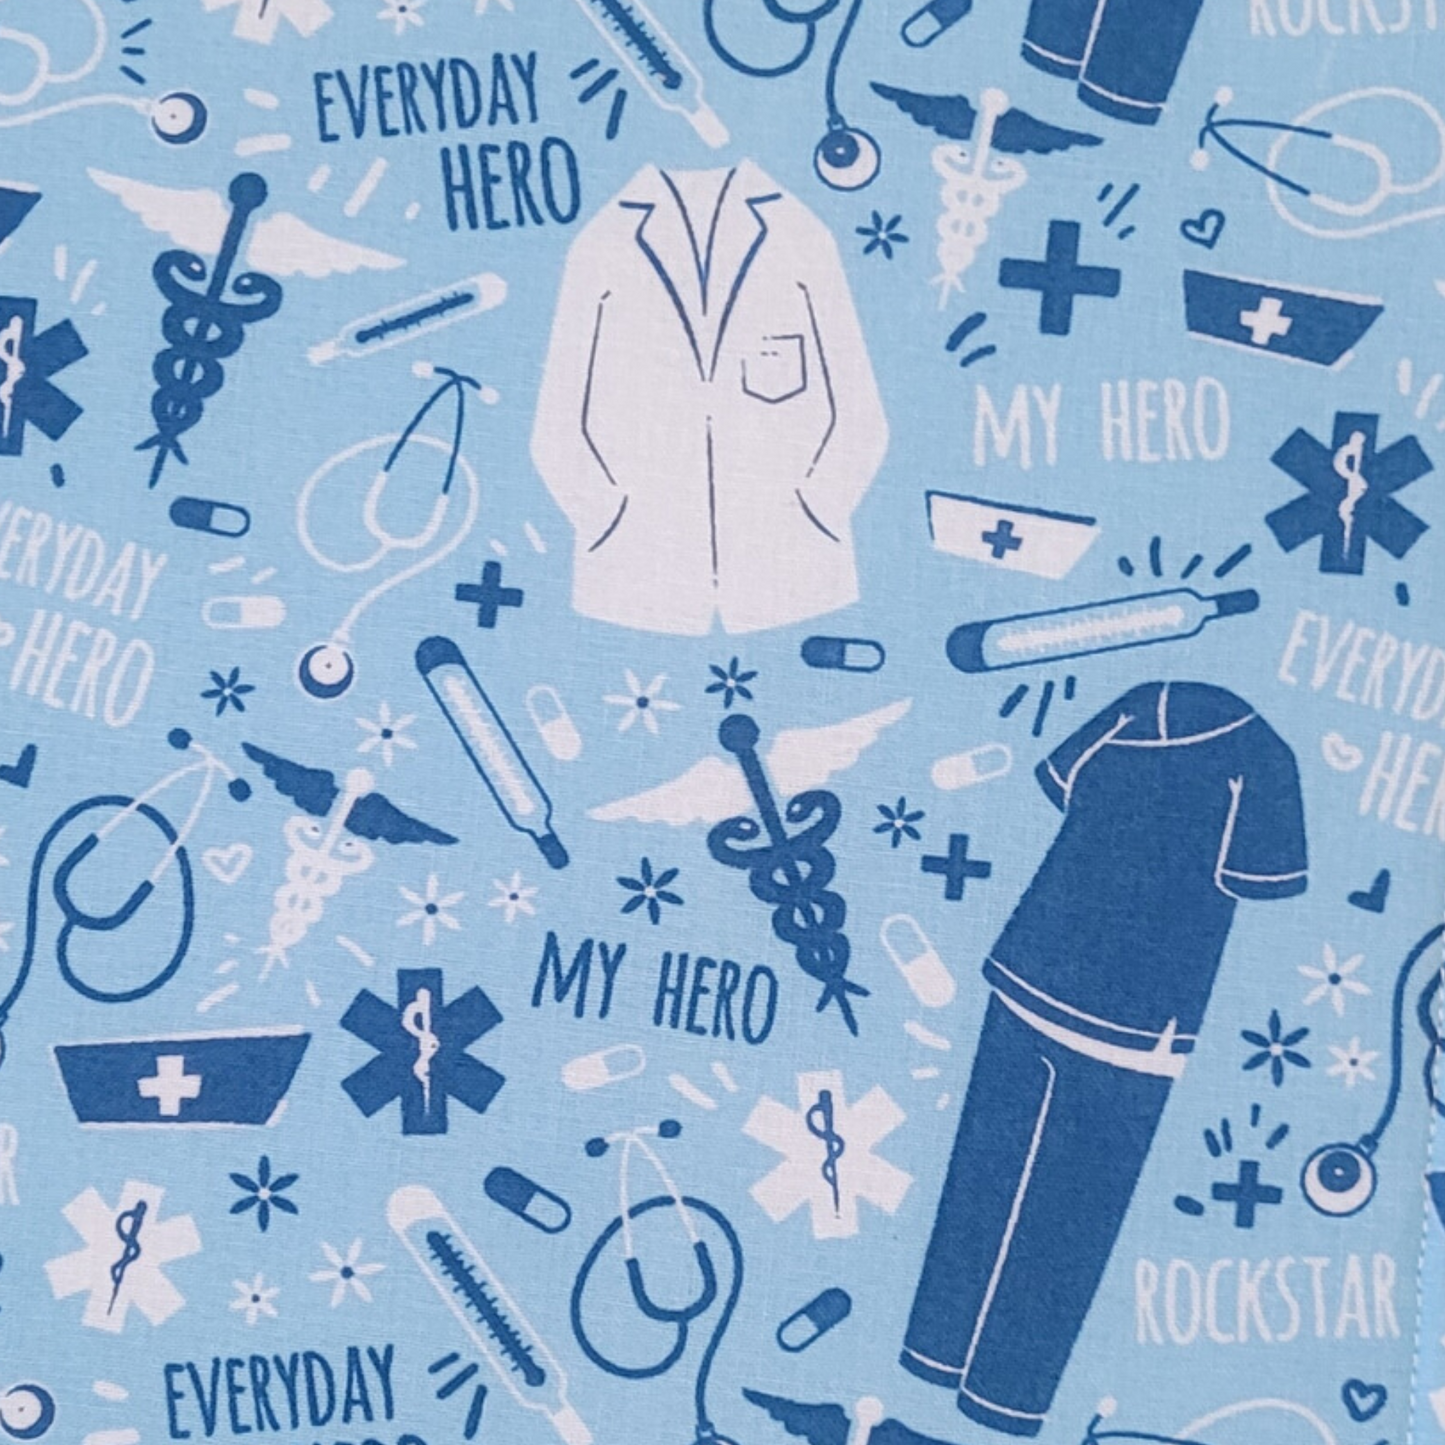 Everyday Hero Composition Book Covers Nurse/Doctor School Office Journal Diary